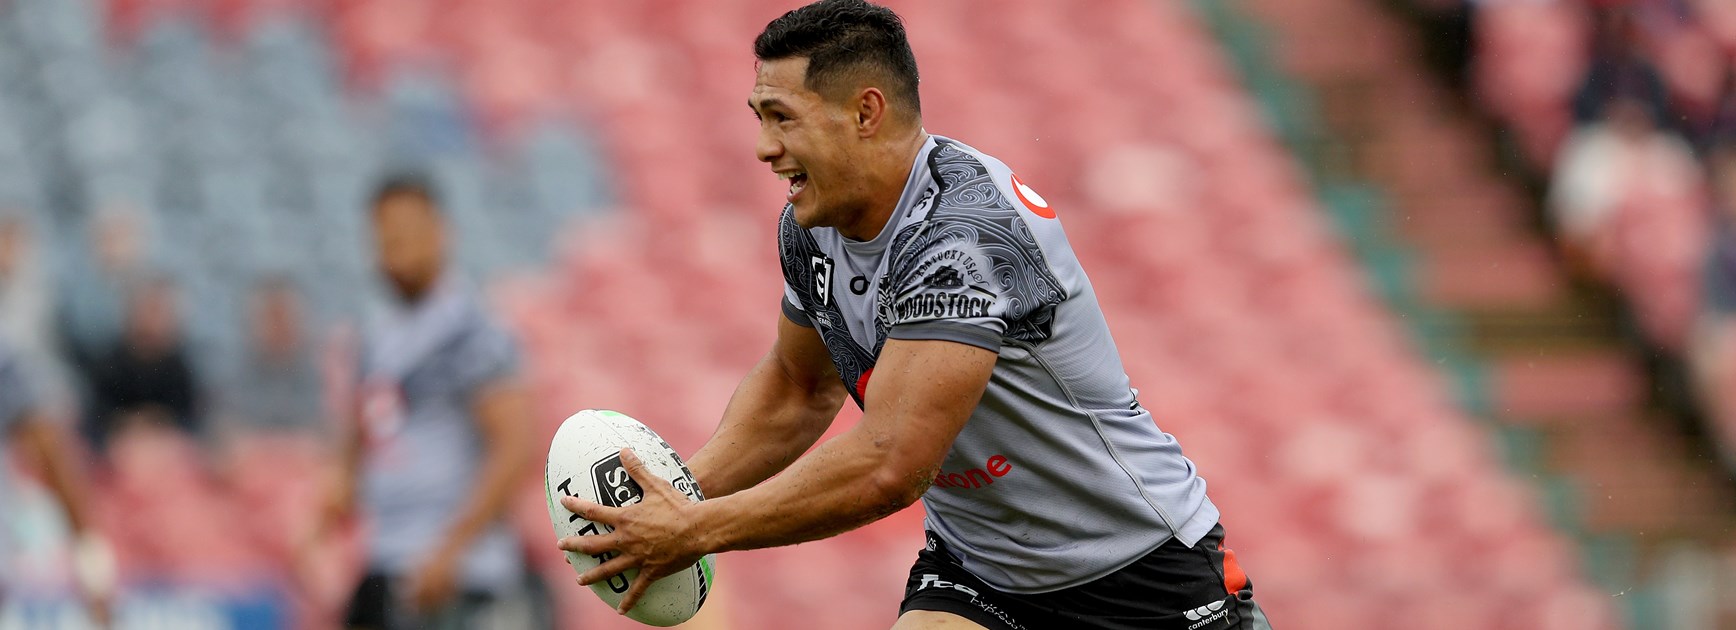 The Opposition: New Zealand Warriors